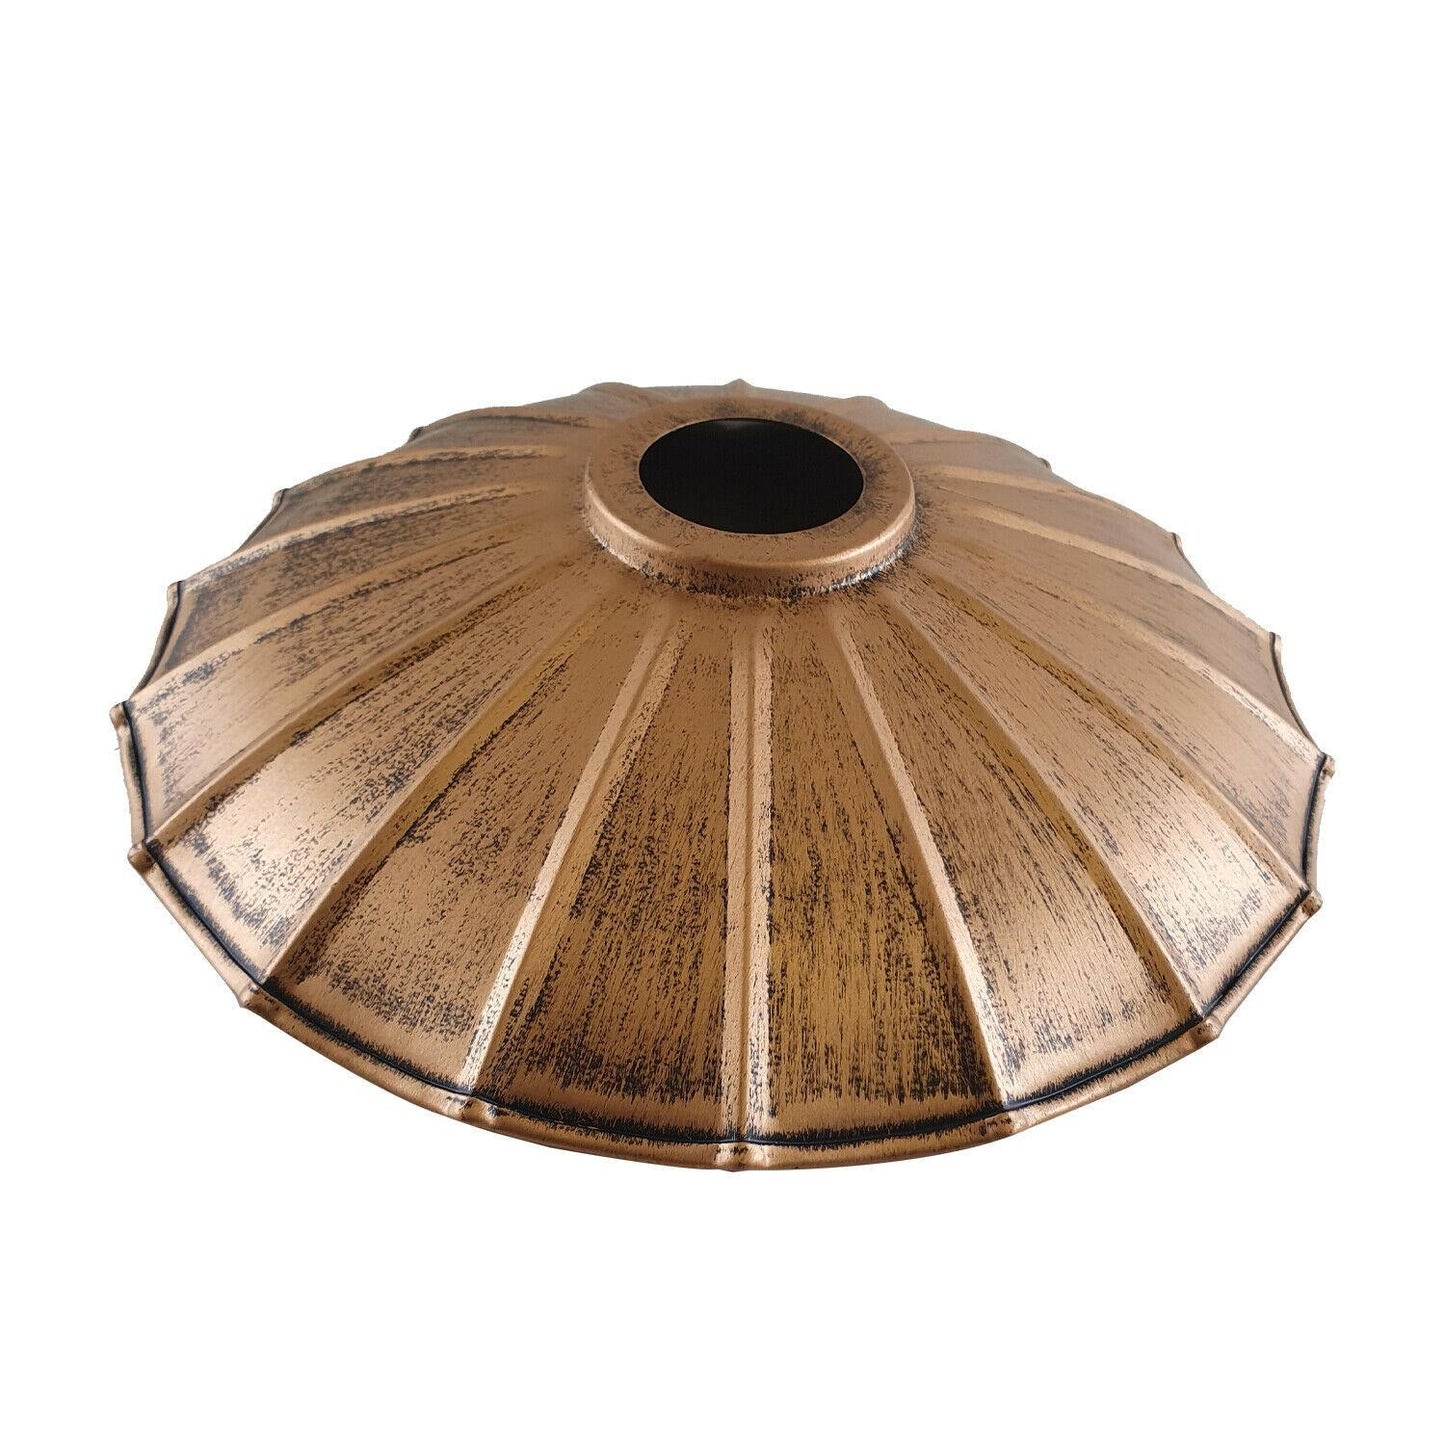  Industrial Wavy Shade Rustic Lampshade Ceiling Pendant Light